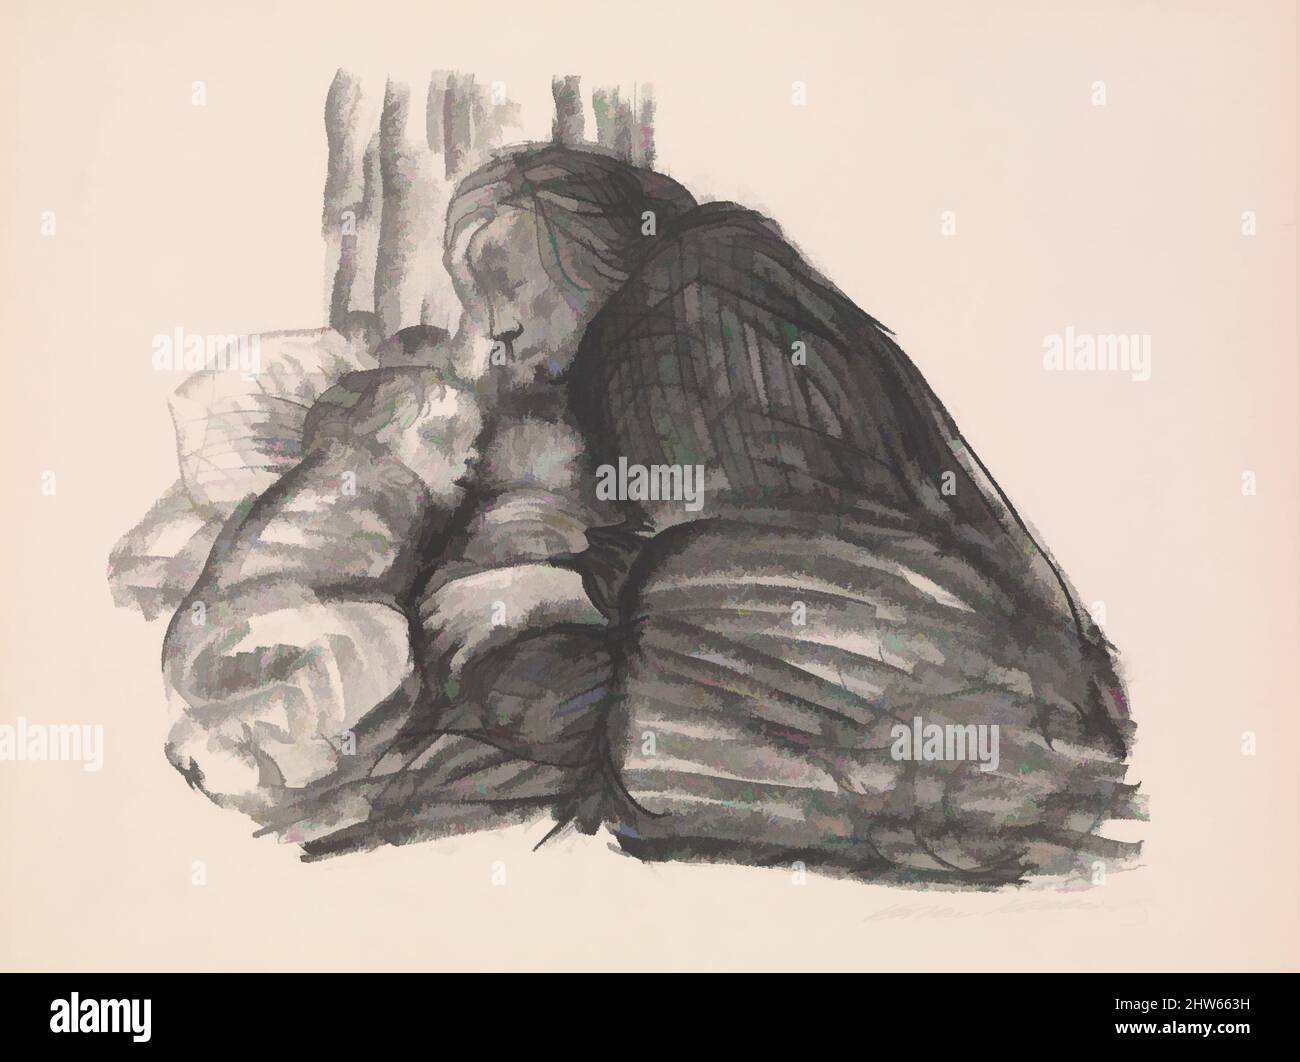 Art inspired by City Shelter (Städtisches Obdach), 1926, Lithograph, image: 17 1/4 x 21 1/4 in. (43.8 x 54 cm), Prints, Käthe Kollwitz (German, Kaliningrad (Königsberg) 1867–1945 Moritzburg, Classic works modernized by Artotop with a splash of modernity. Shapes, color and value, eye-catching visual impact on art. Emotions through freedom of artworks in a contemporary way. A timeless message pursuing a wildly creative new direction. Artists turning to the digital medium and creating the Artotop NFT Stock Photo